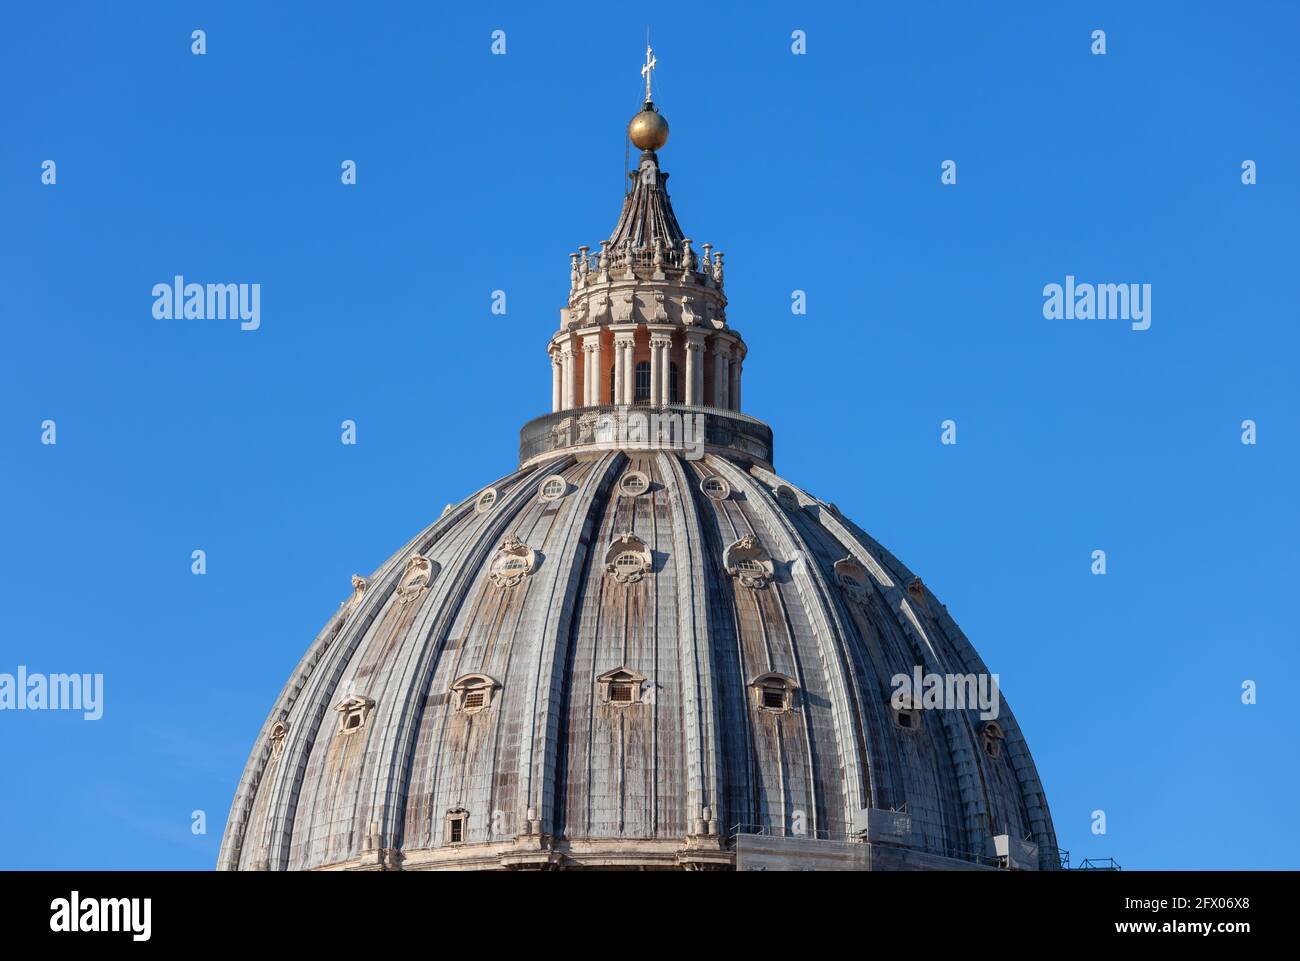 Vatican, iconic dome of the Papal Basilica of Saint Peter isolated against blue sky. Stock Photo